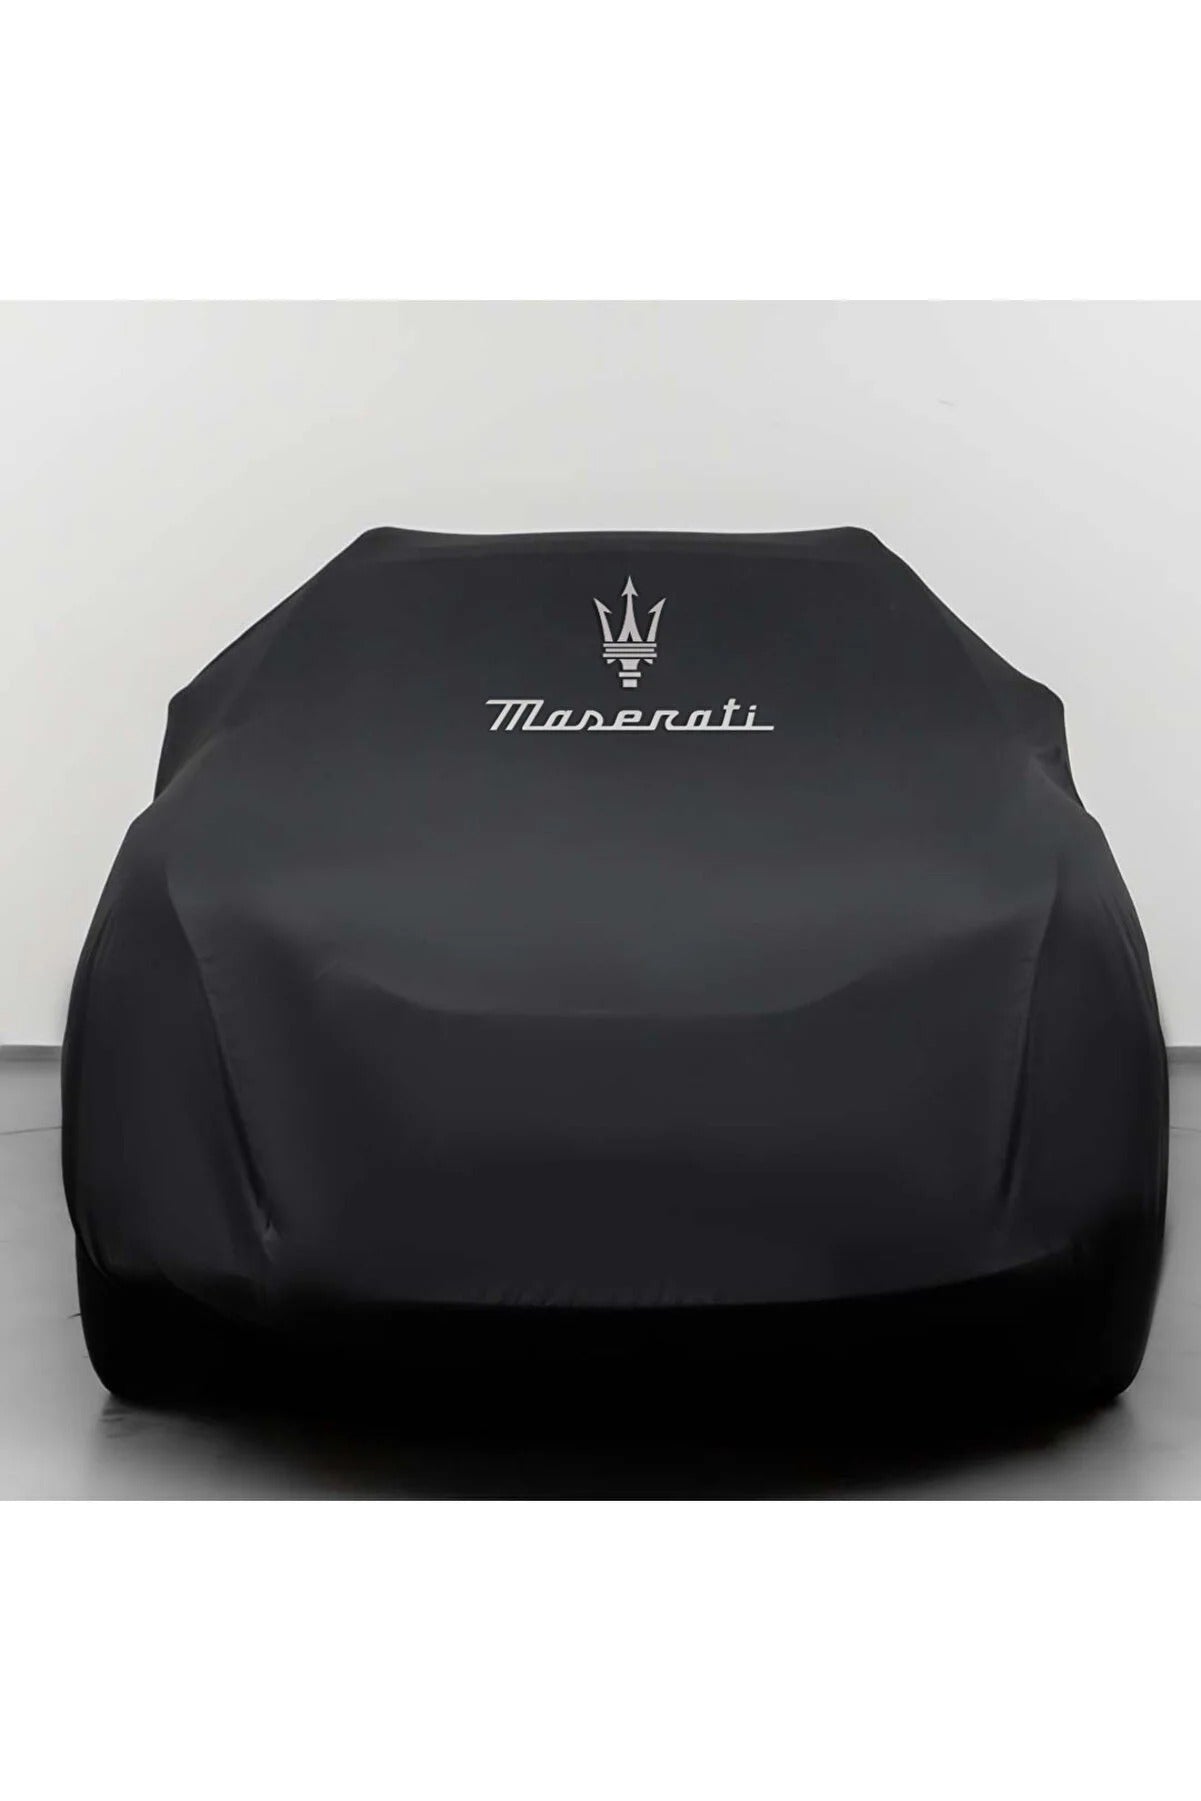 MASERATİ Car Cover Tailor Made for Your Vehicle MASERATİ Vehicle Car Cover Car Protector For all MASERATİ Model